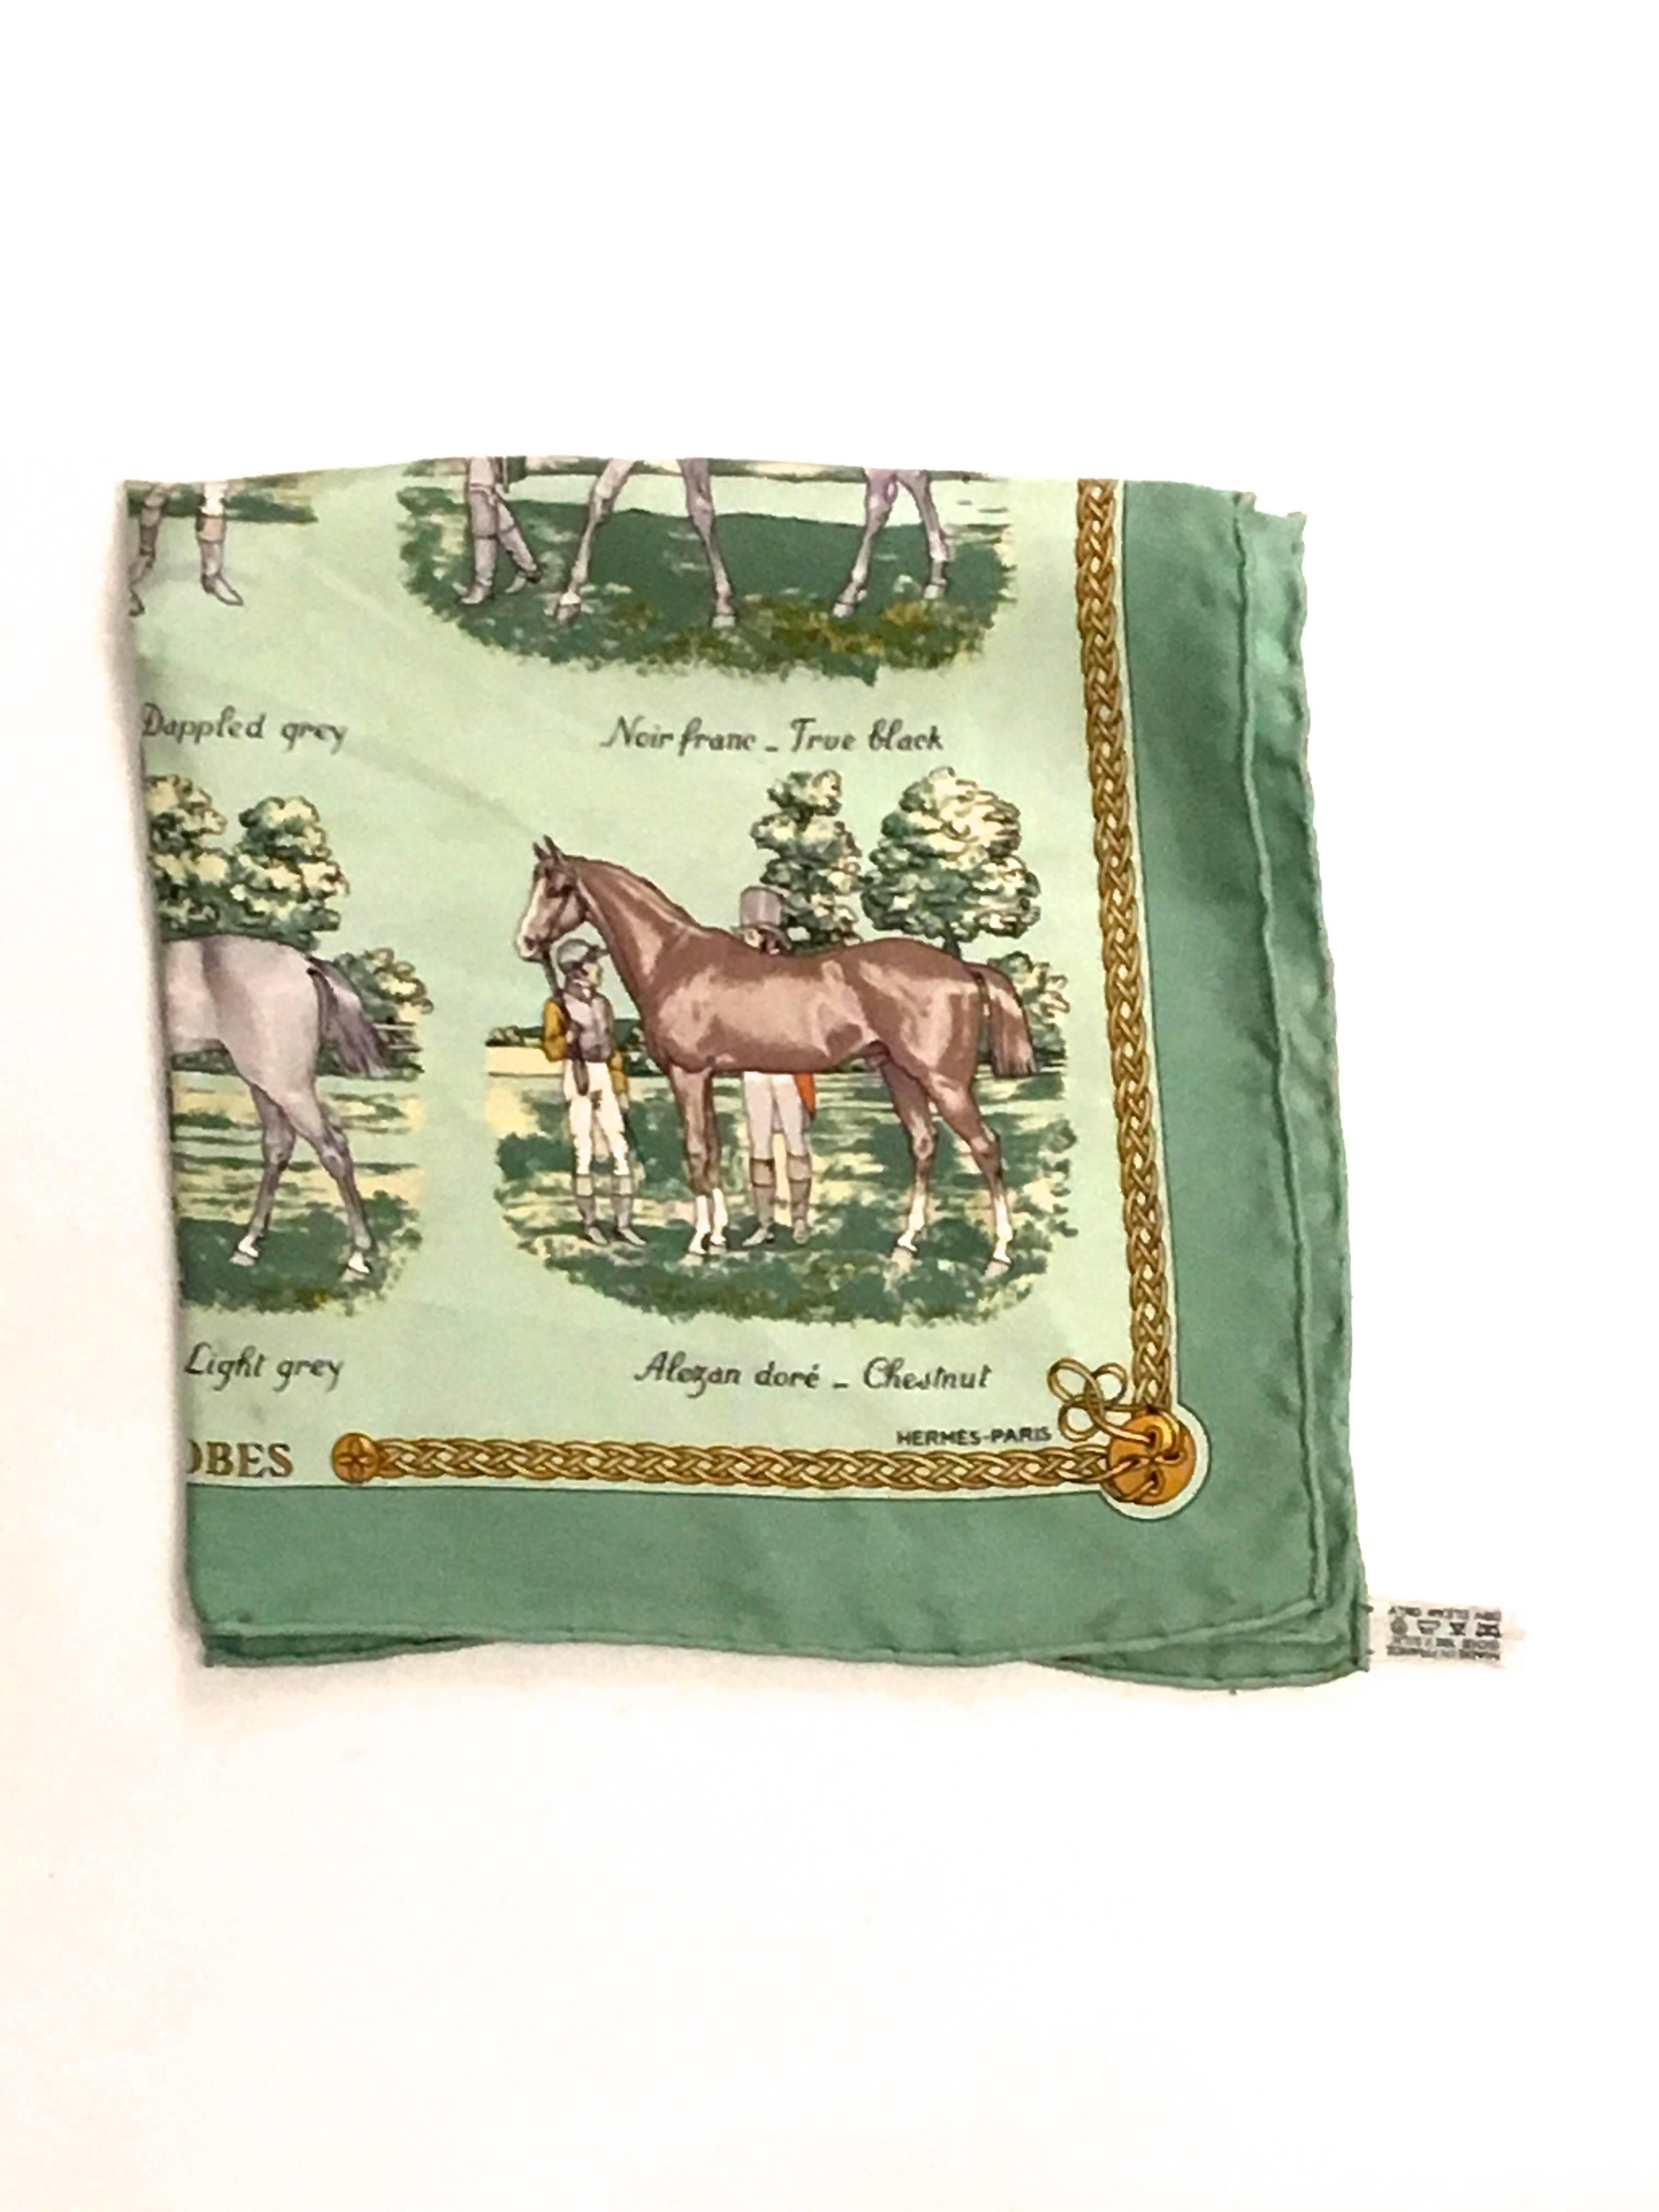 Presented here is a beautiful scarf from Hermes Paris. This vintage scarf is an equestrian theme. The scarf features a series of horses with its associated name / coloring written below the image. The drawings are laid against a background of sea